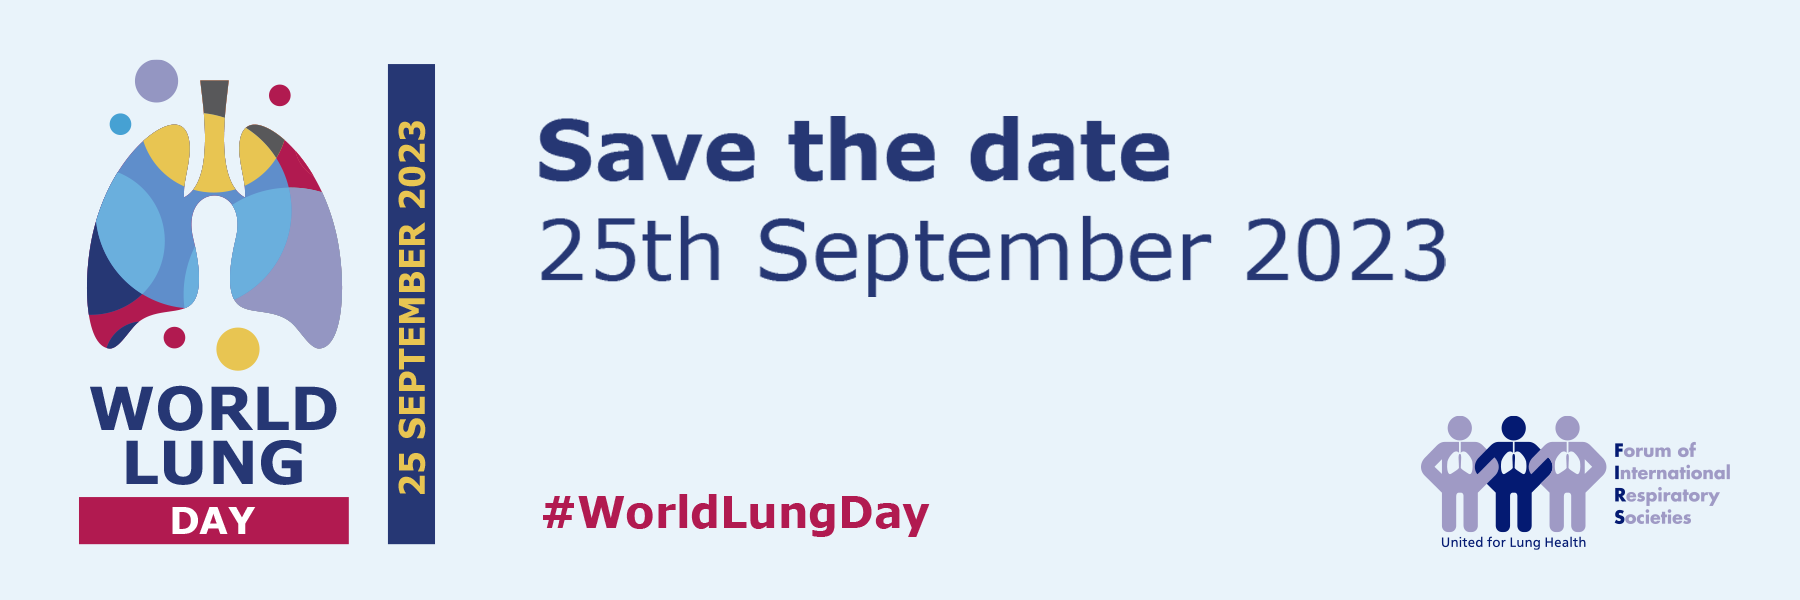 World Lung Day 2023: Honoring Lung Health